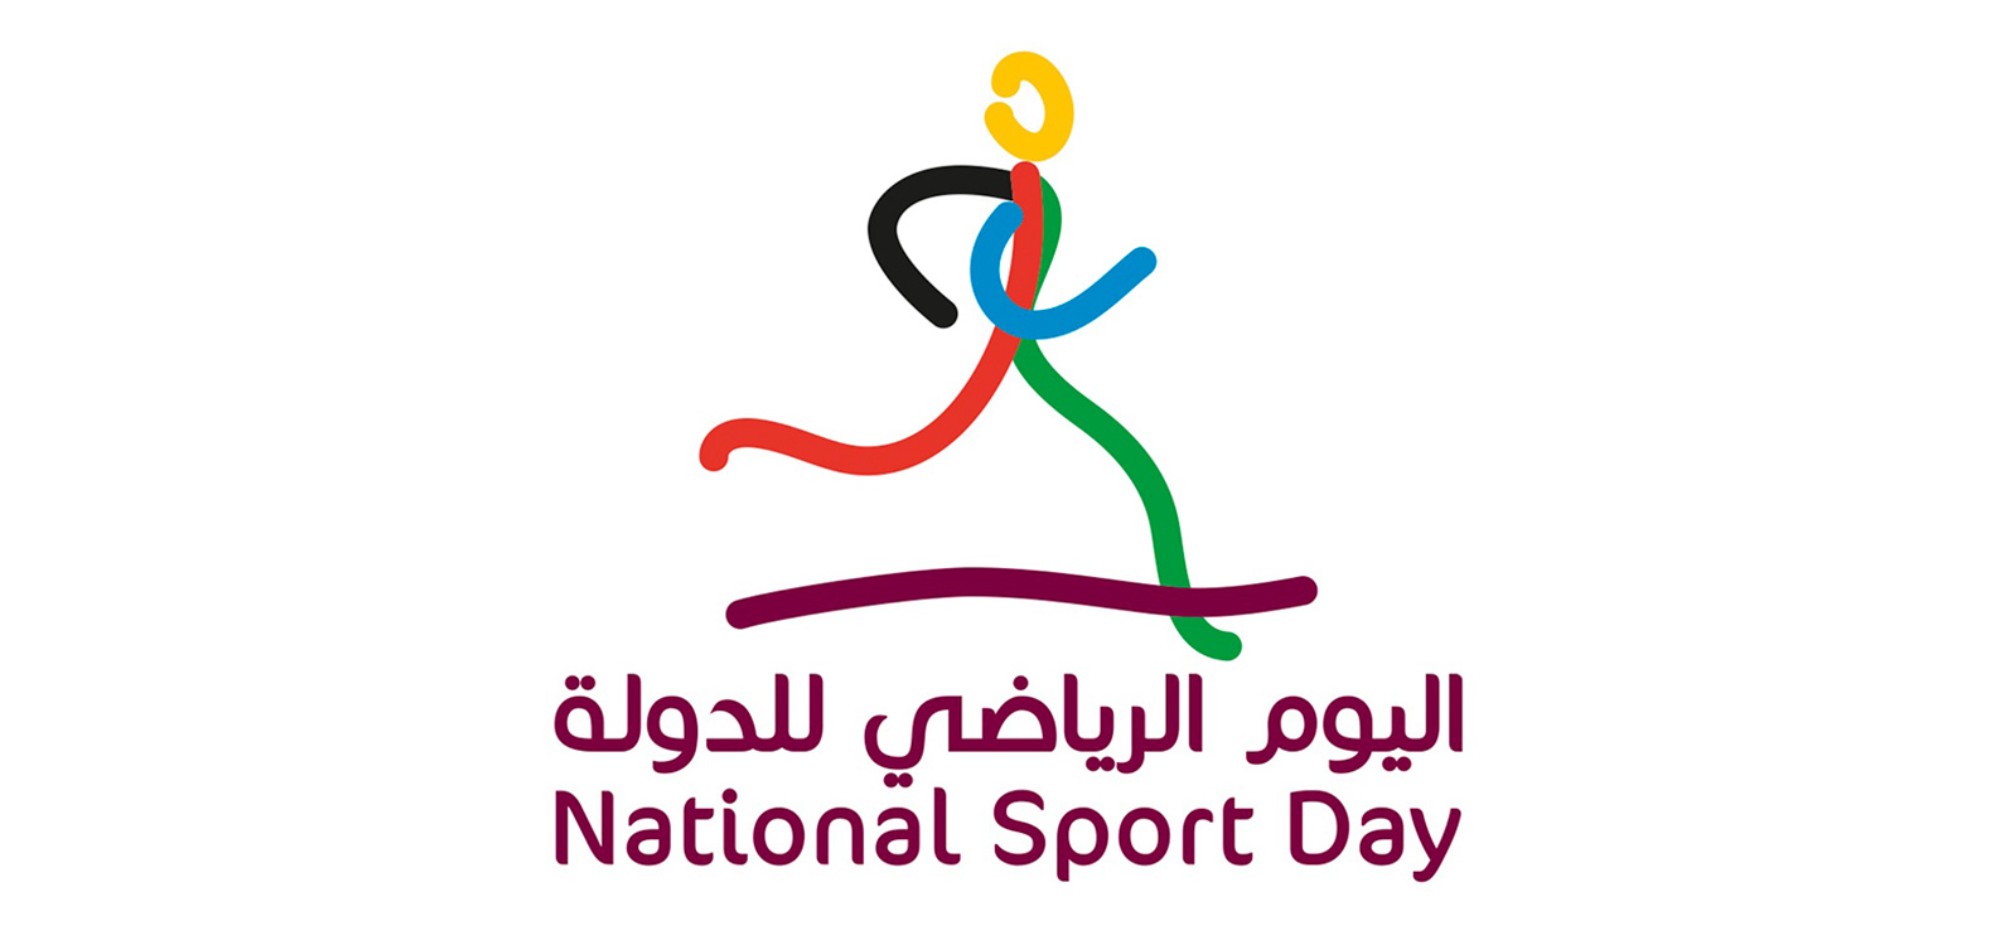 No group activities, contact sports this National Sport Day